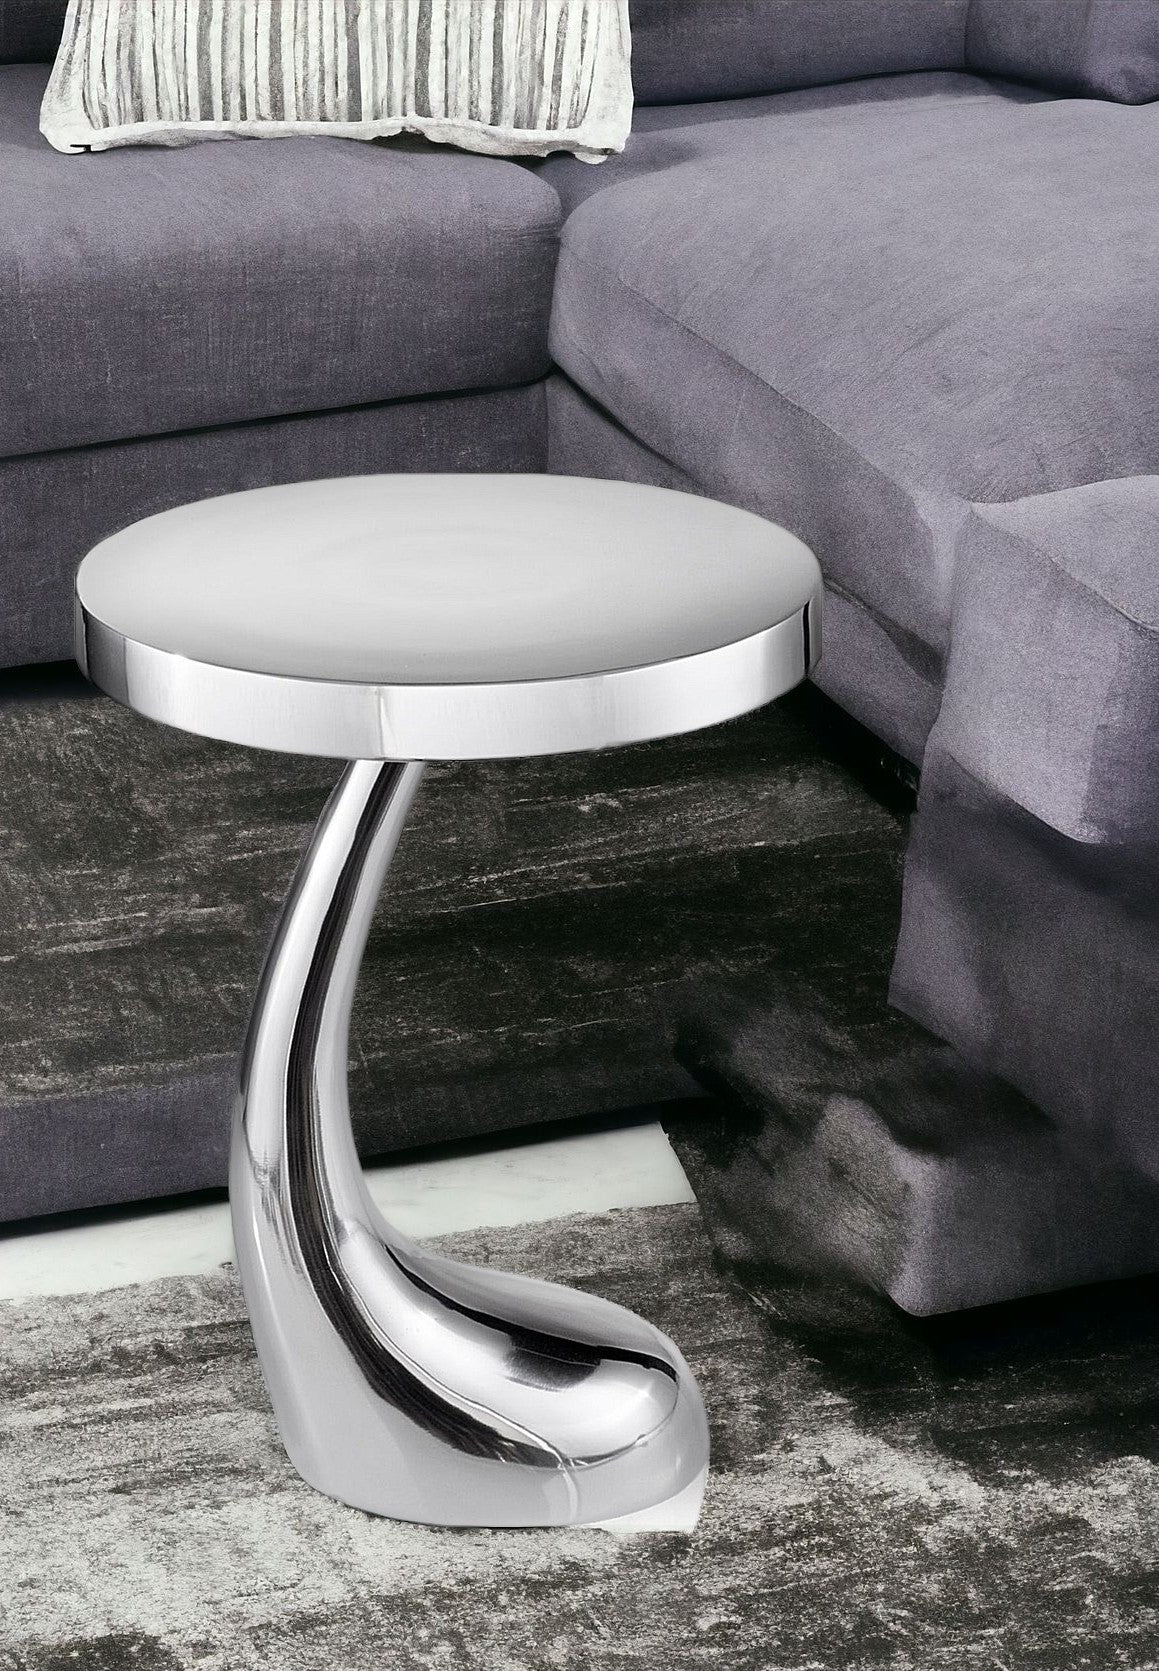 21" Silver Aluminum Round End Table